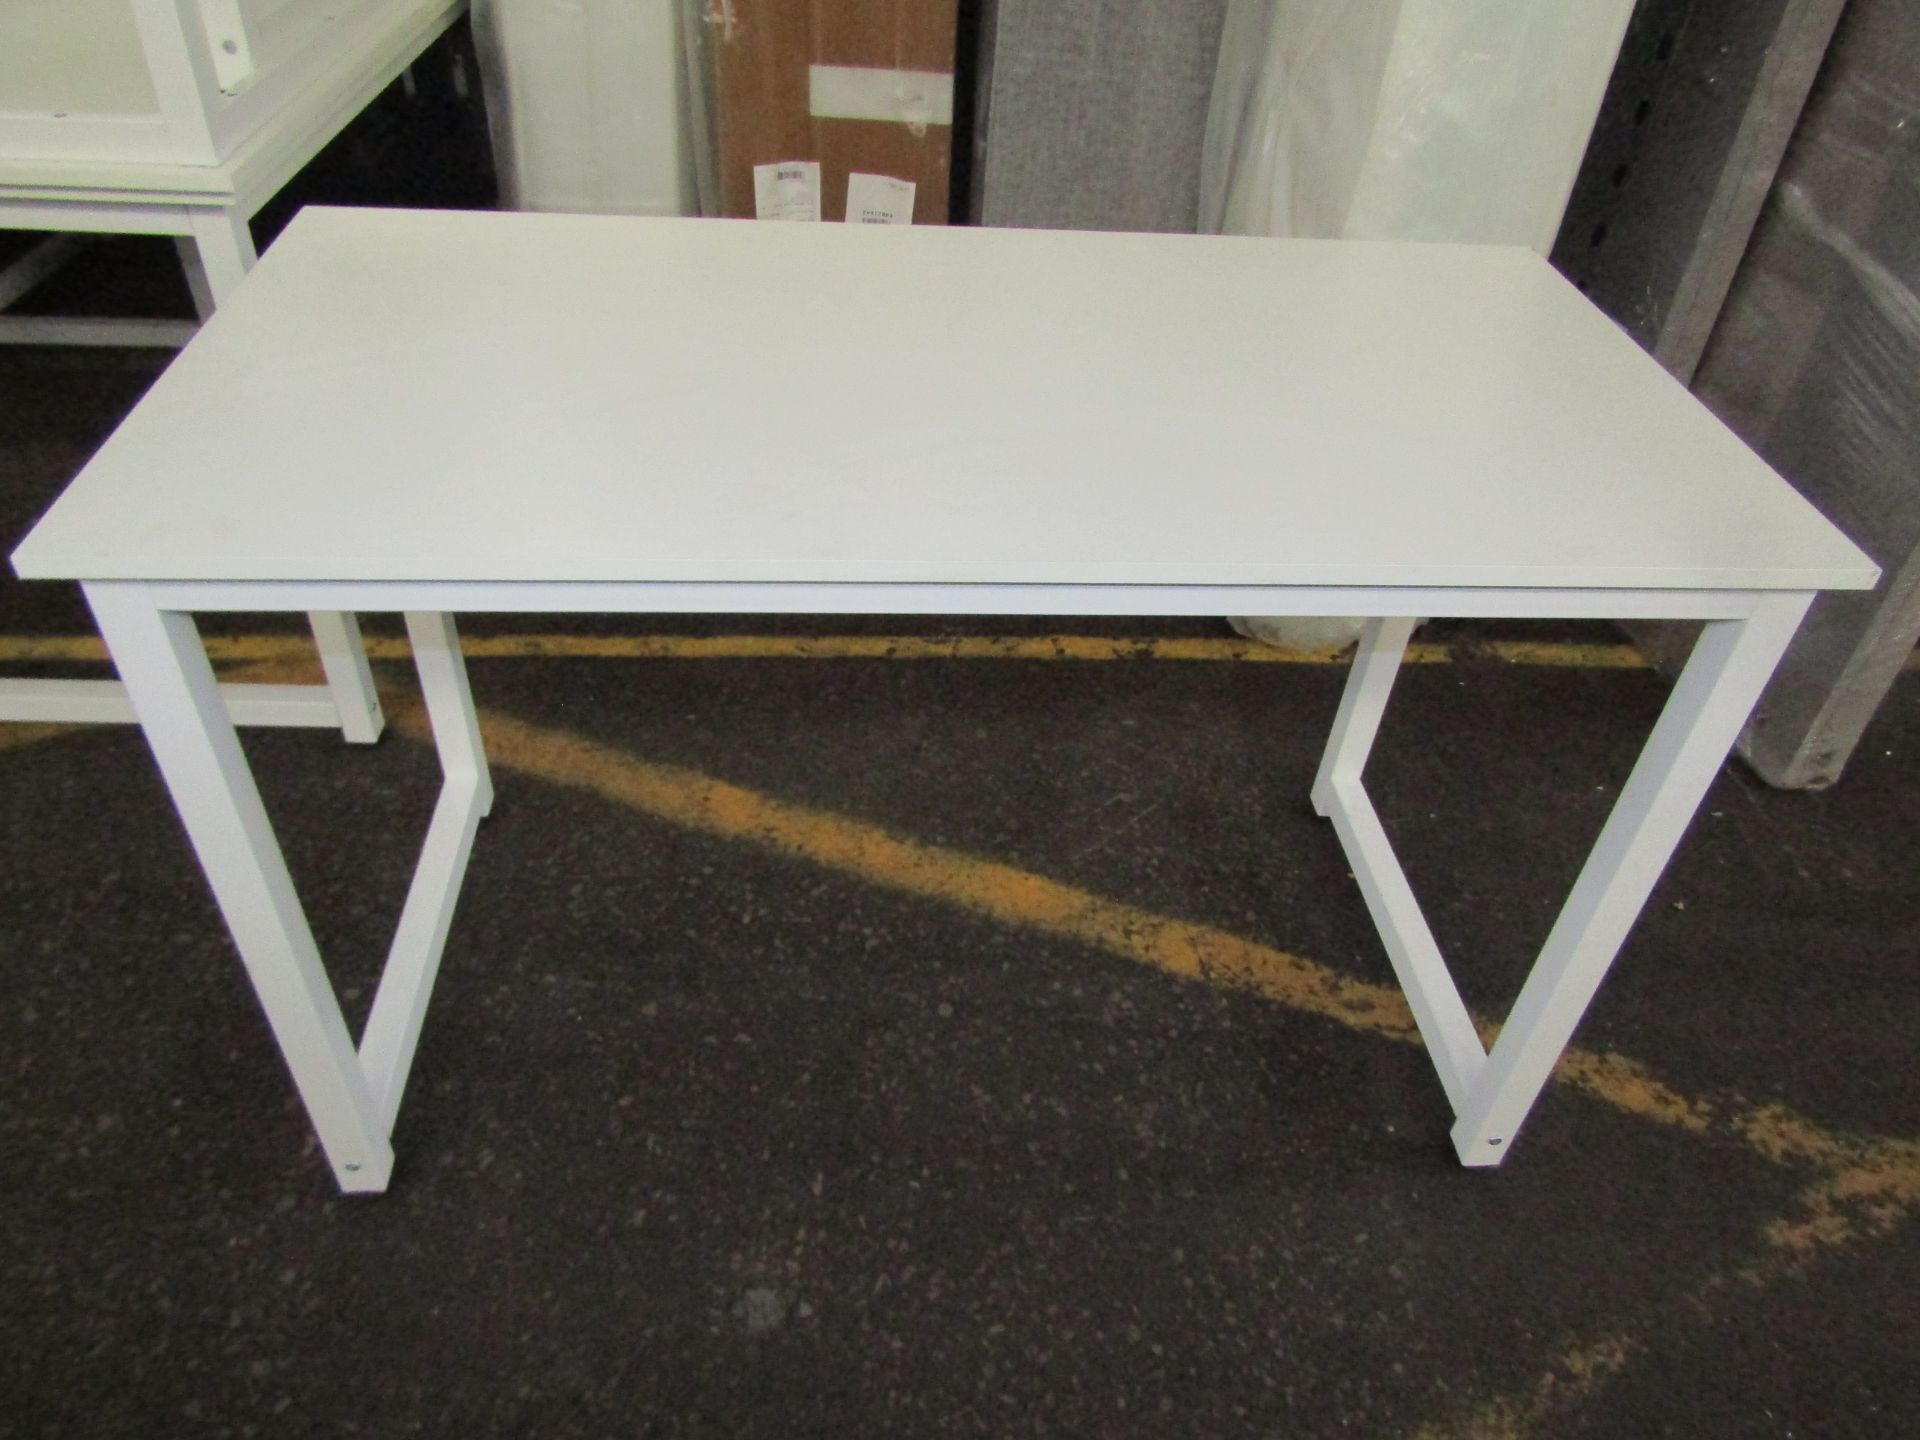 White Wooden Computer Desk With Thick Metal Legs - Fairly Decent Condition However May Contain